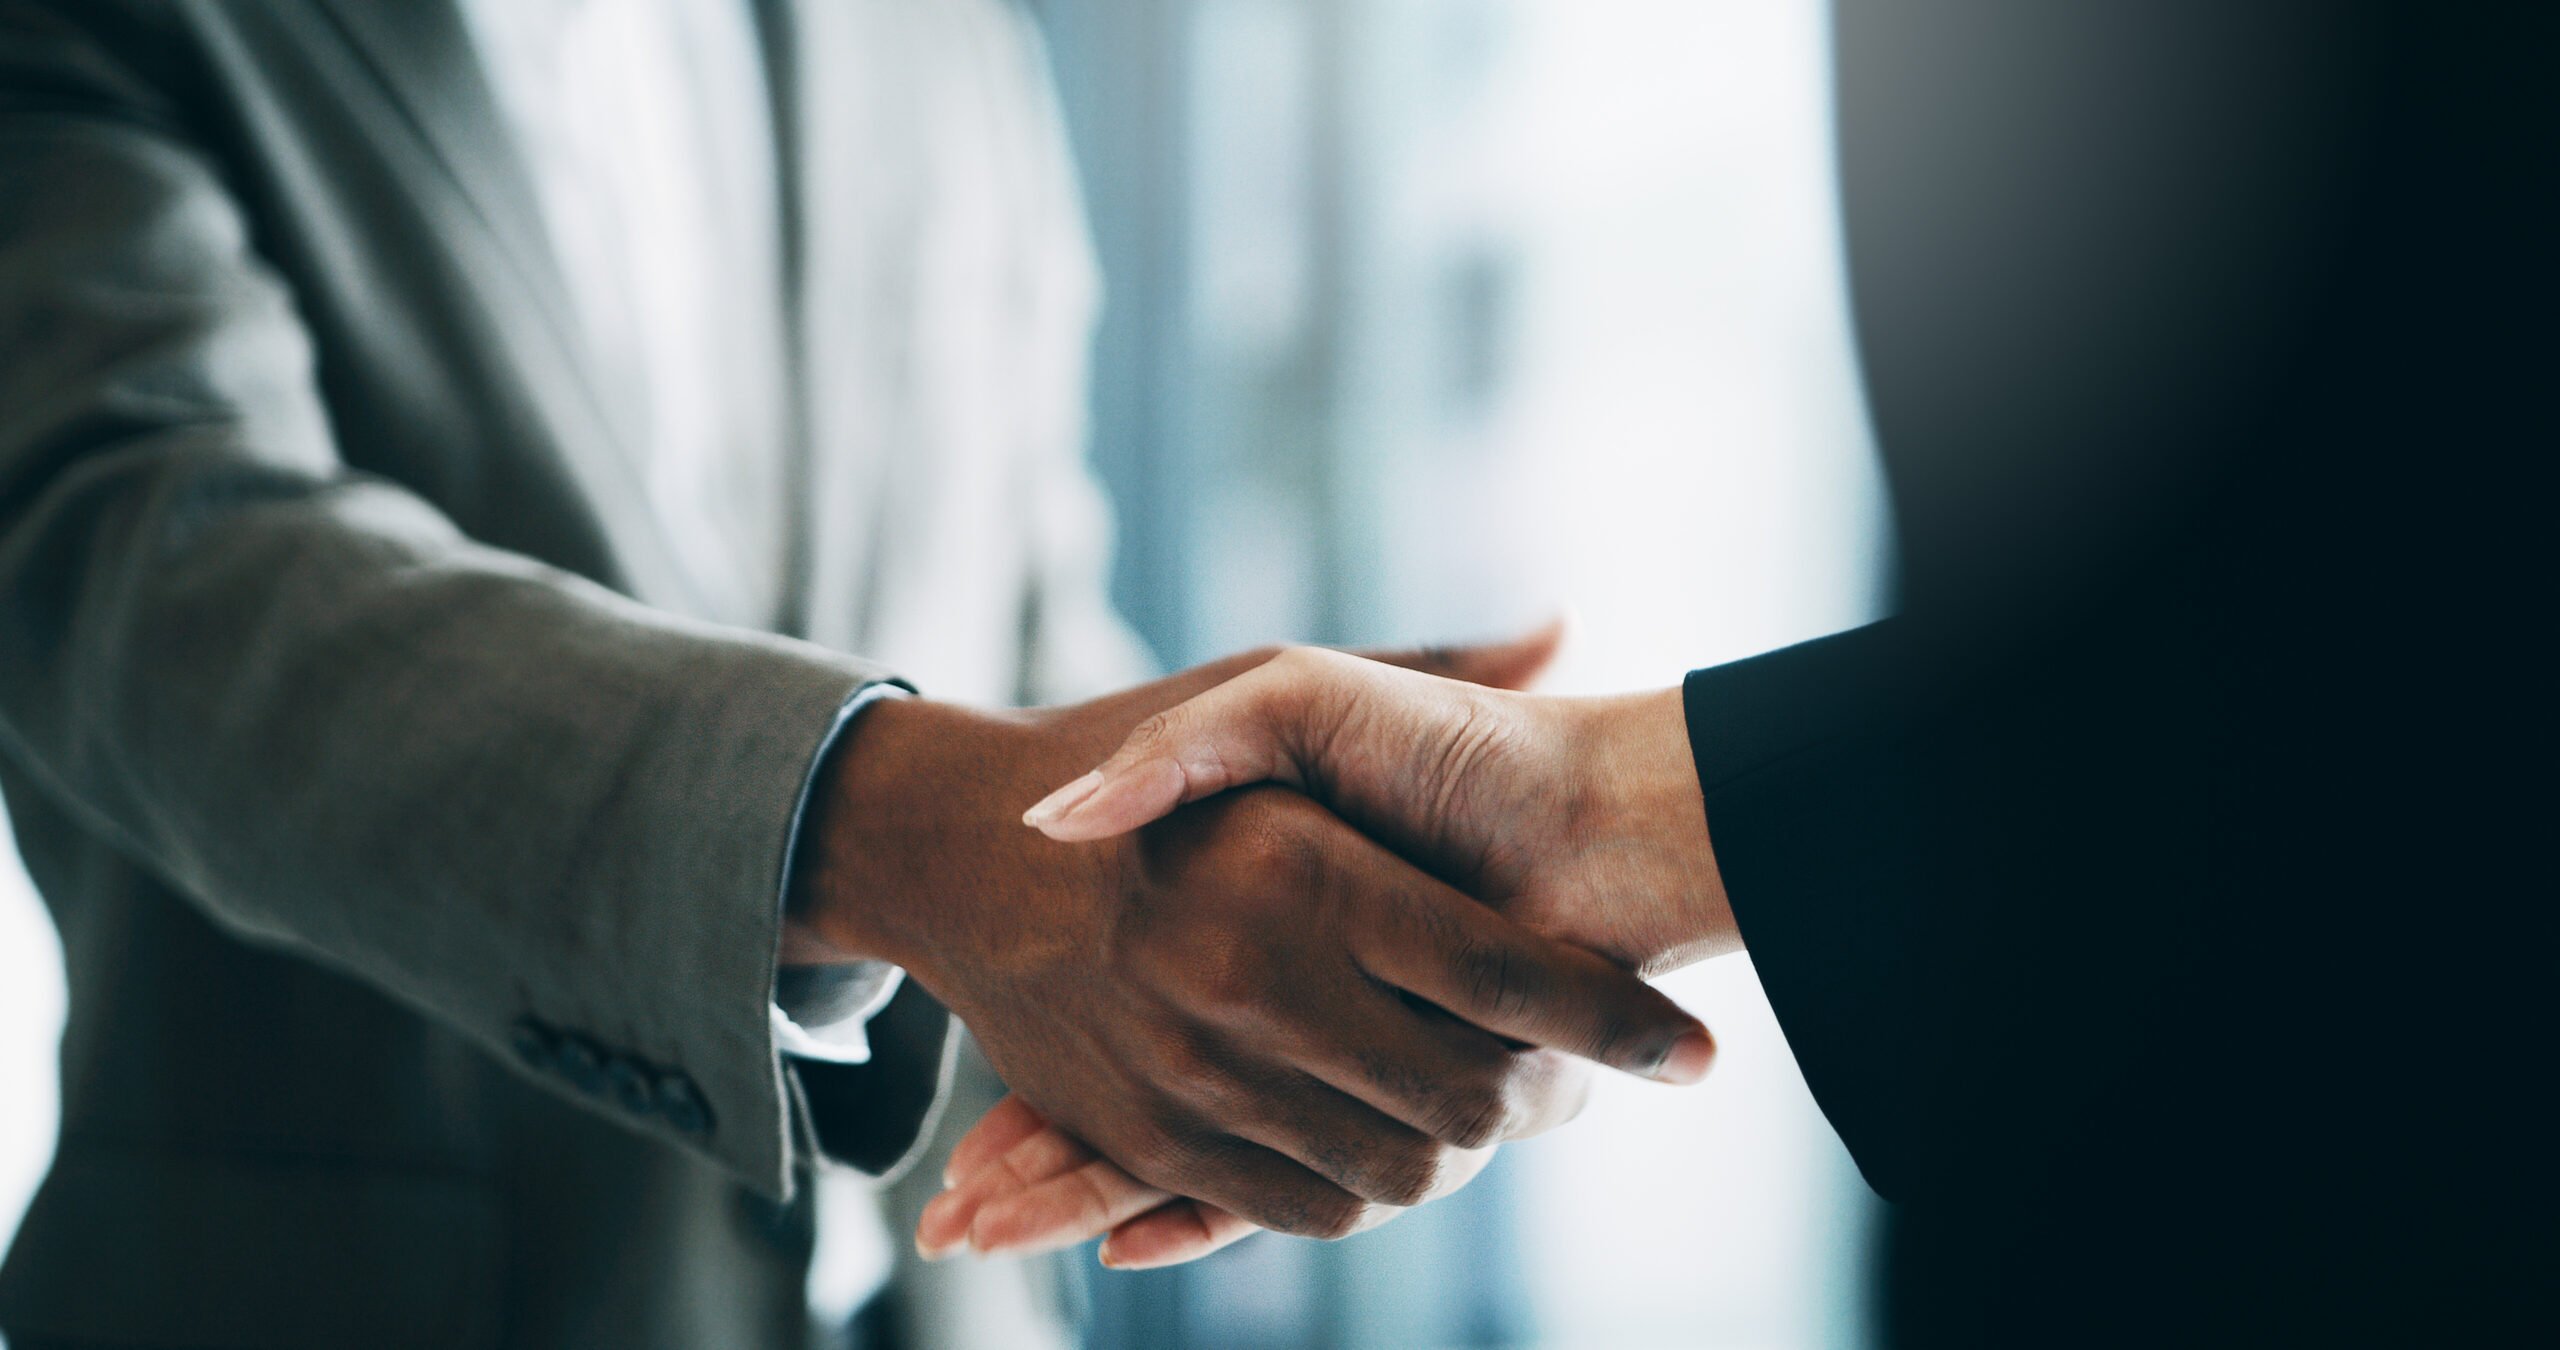 Closeup shot of two unrecognisable businesspeople shaking hands in an office